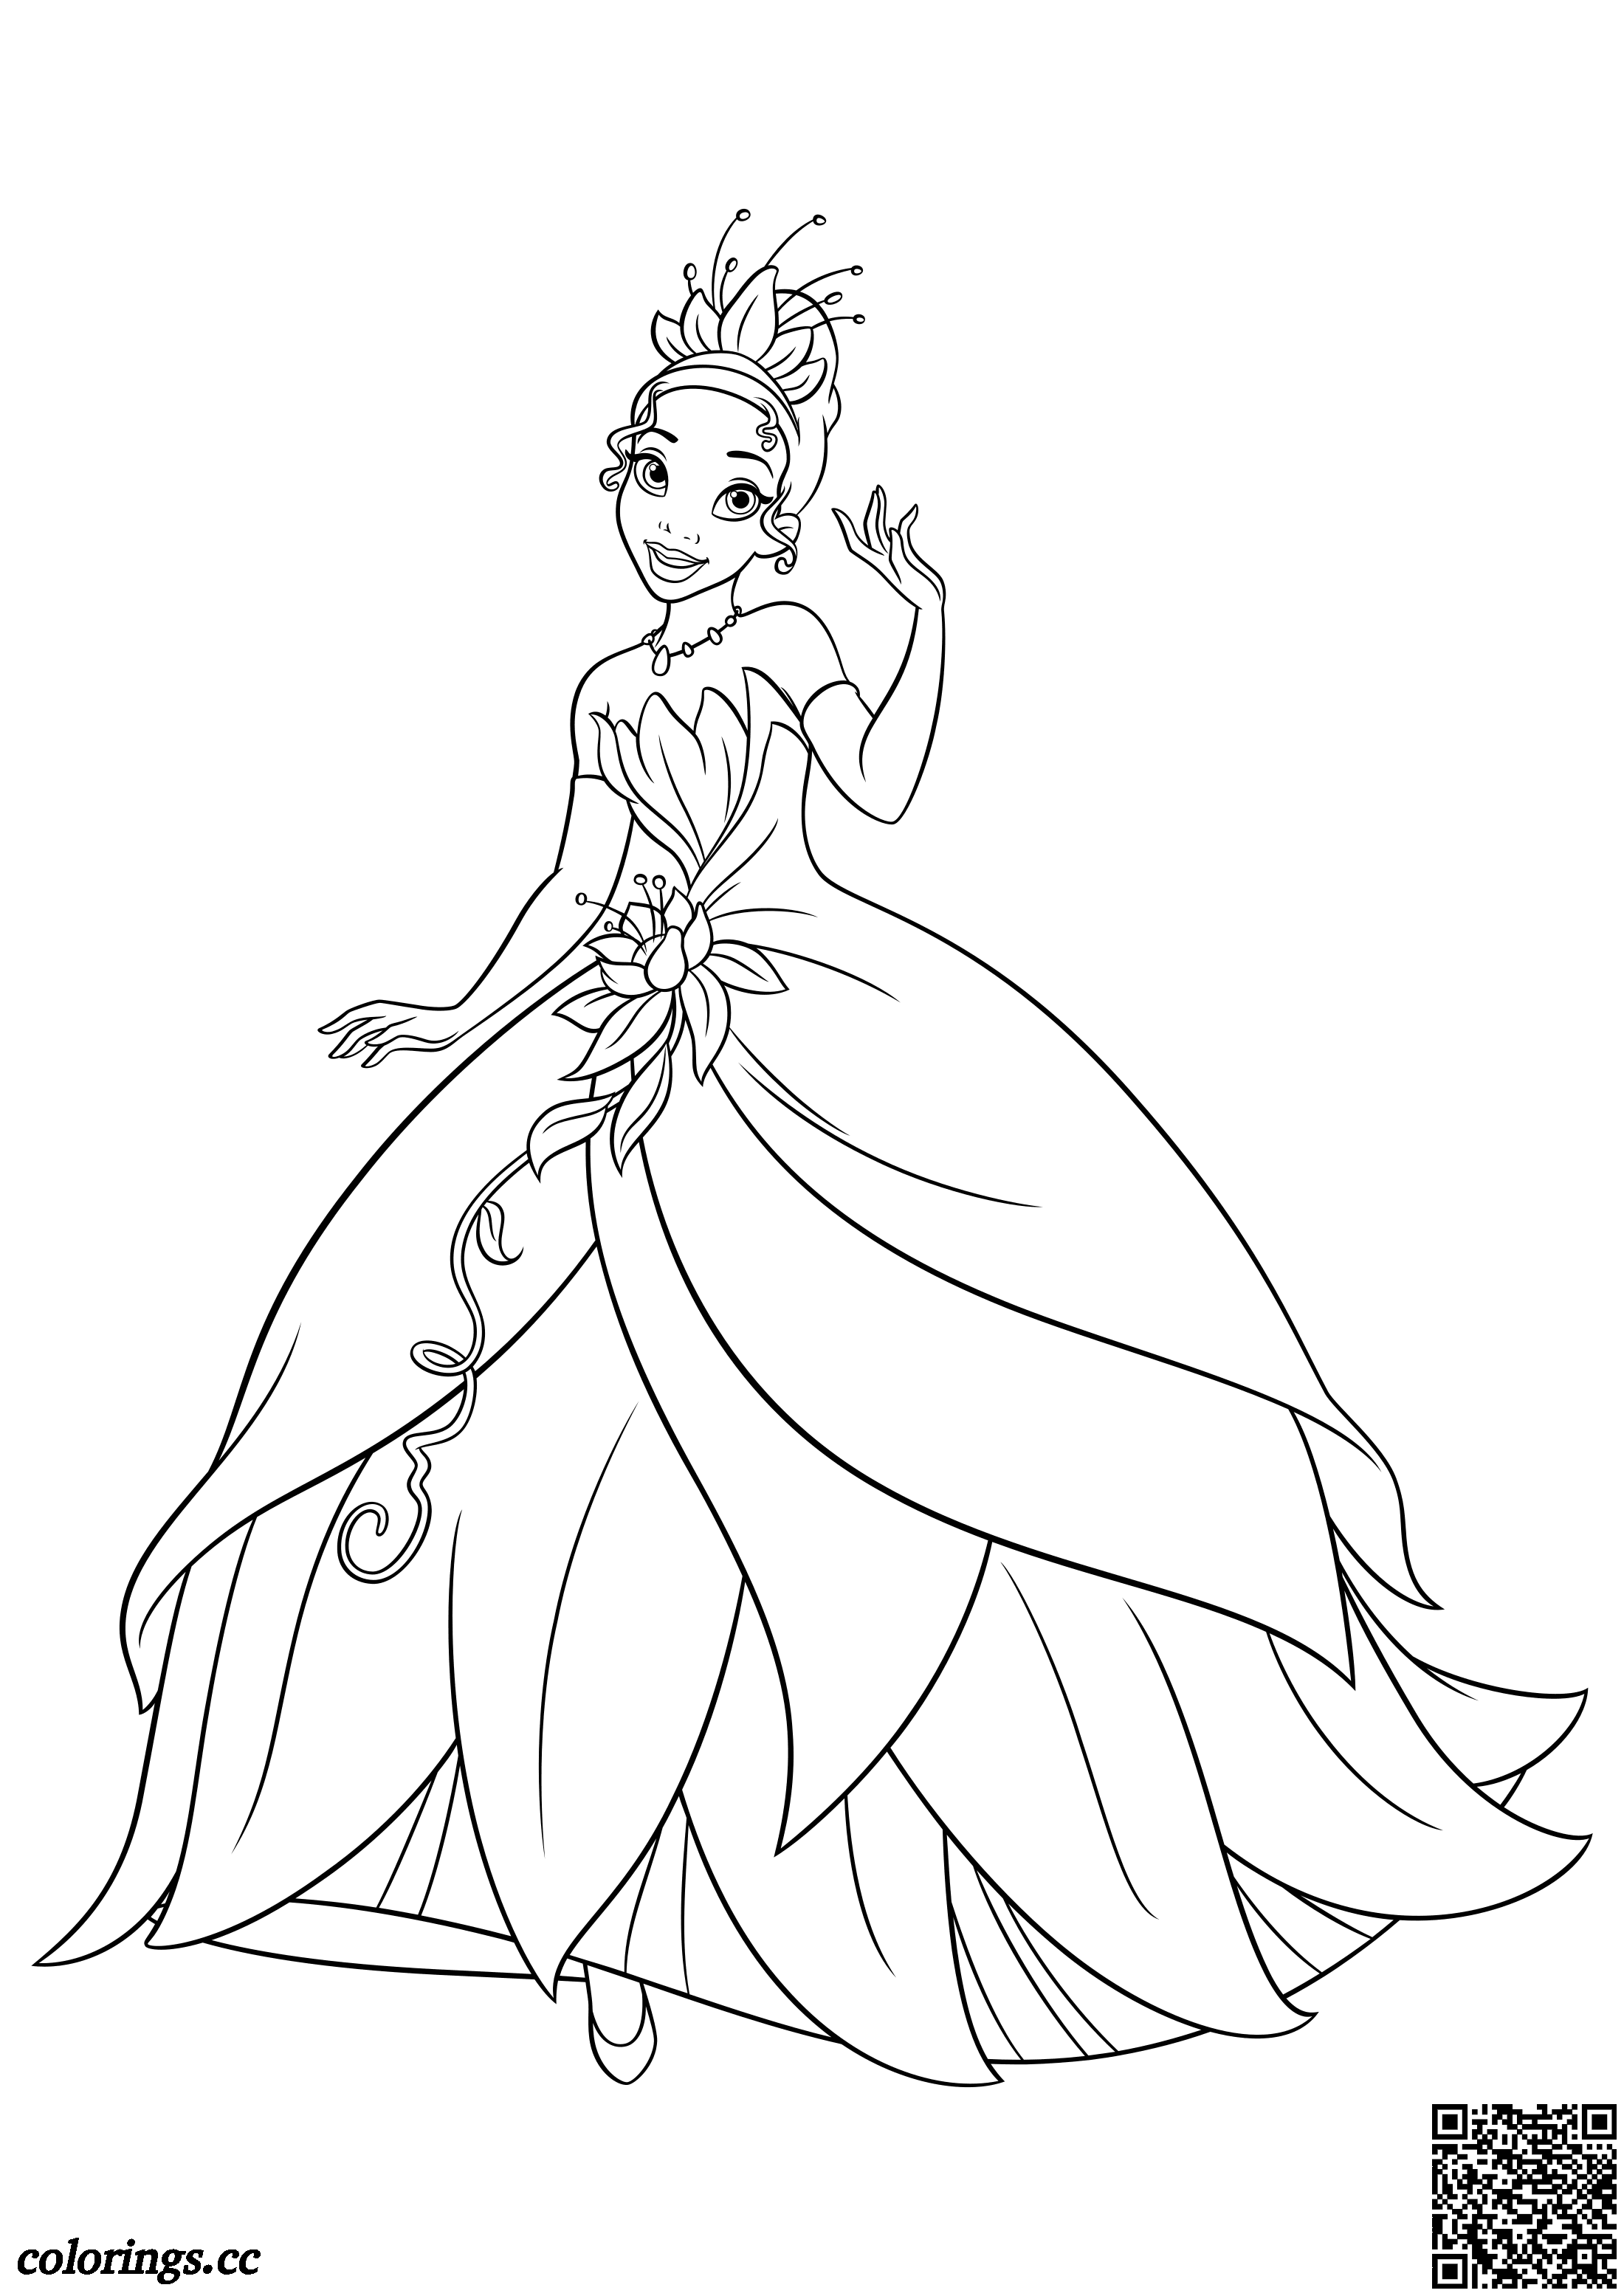 Tiana in an elegant dress coloring pages, Disney princesses ...